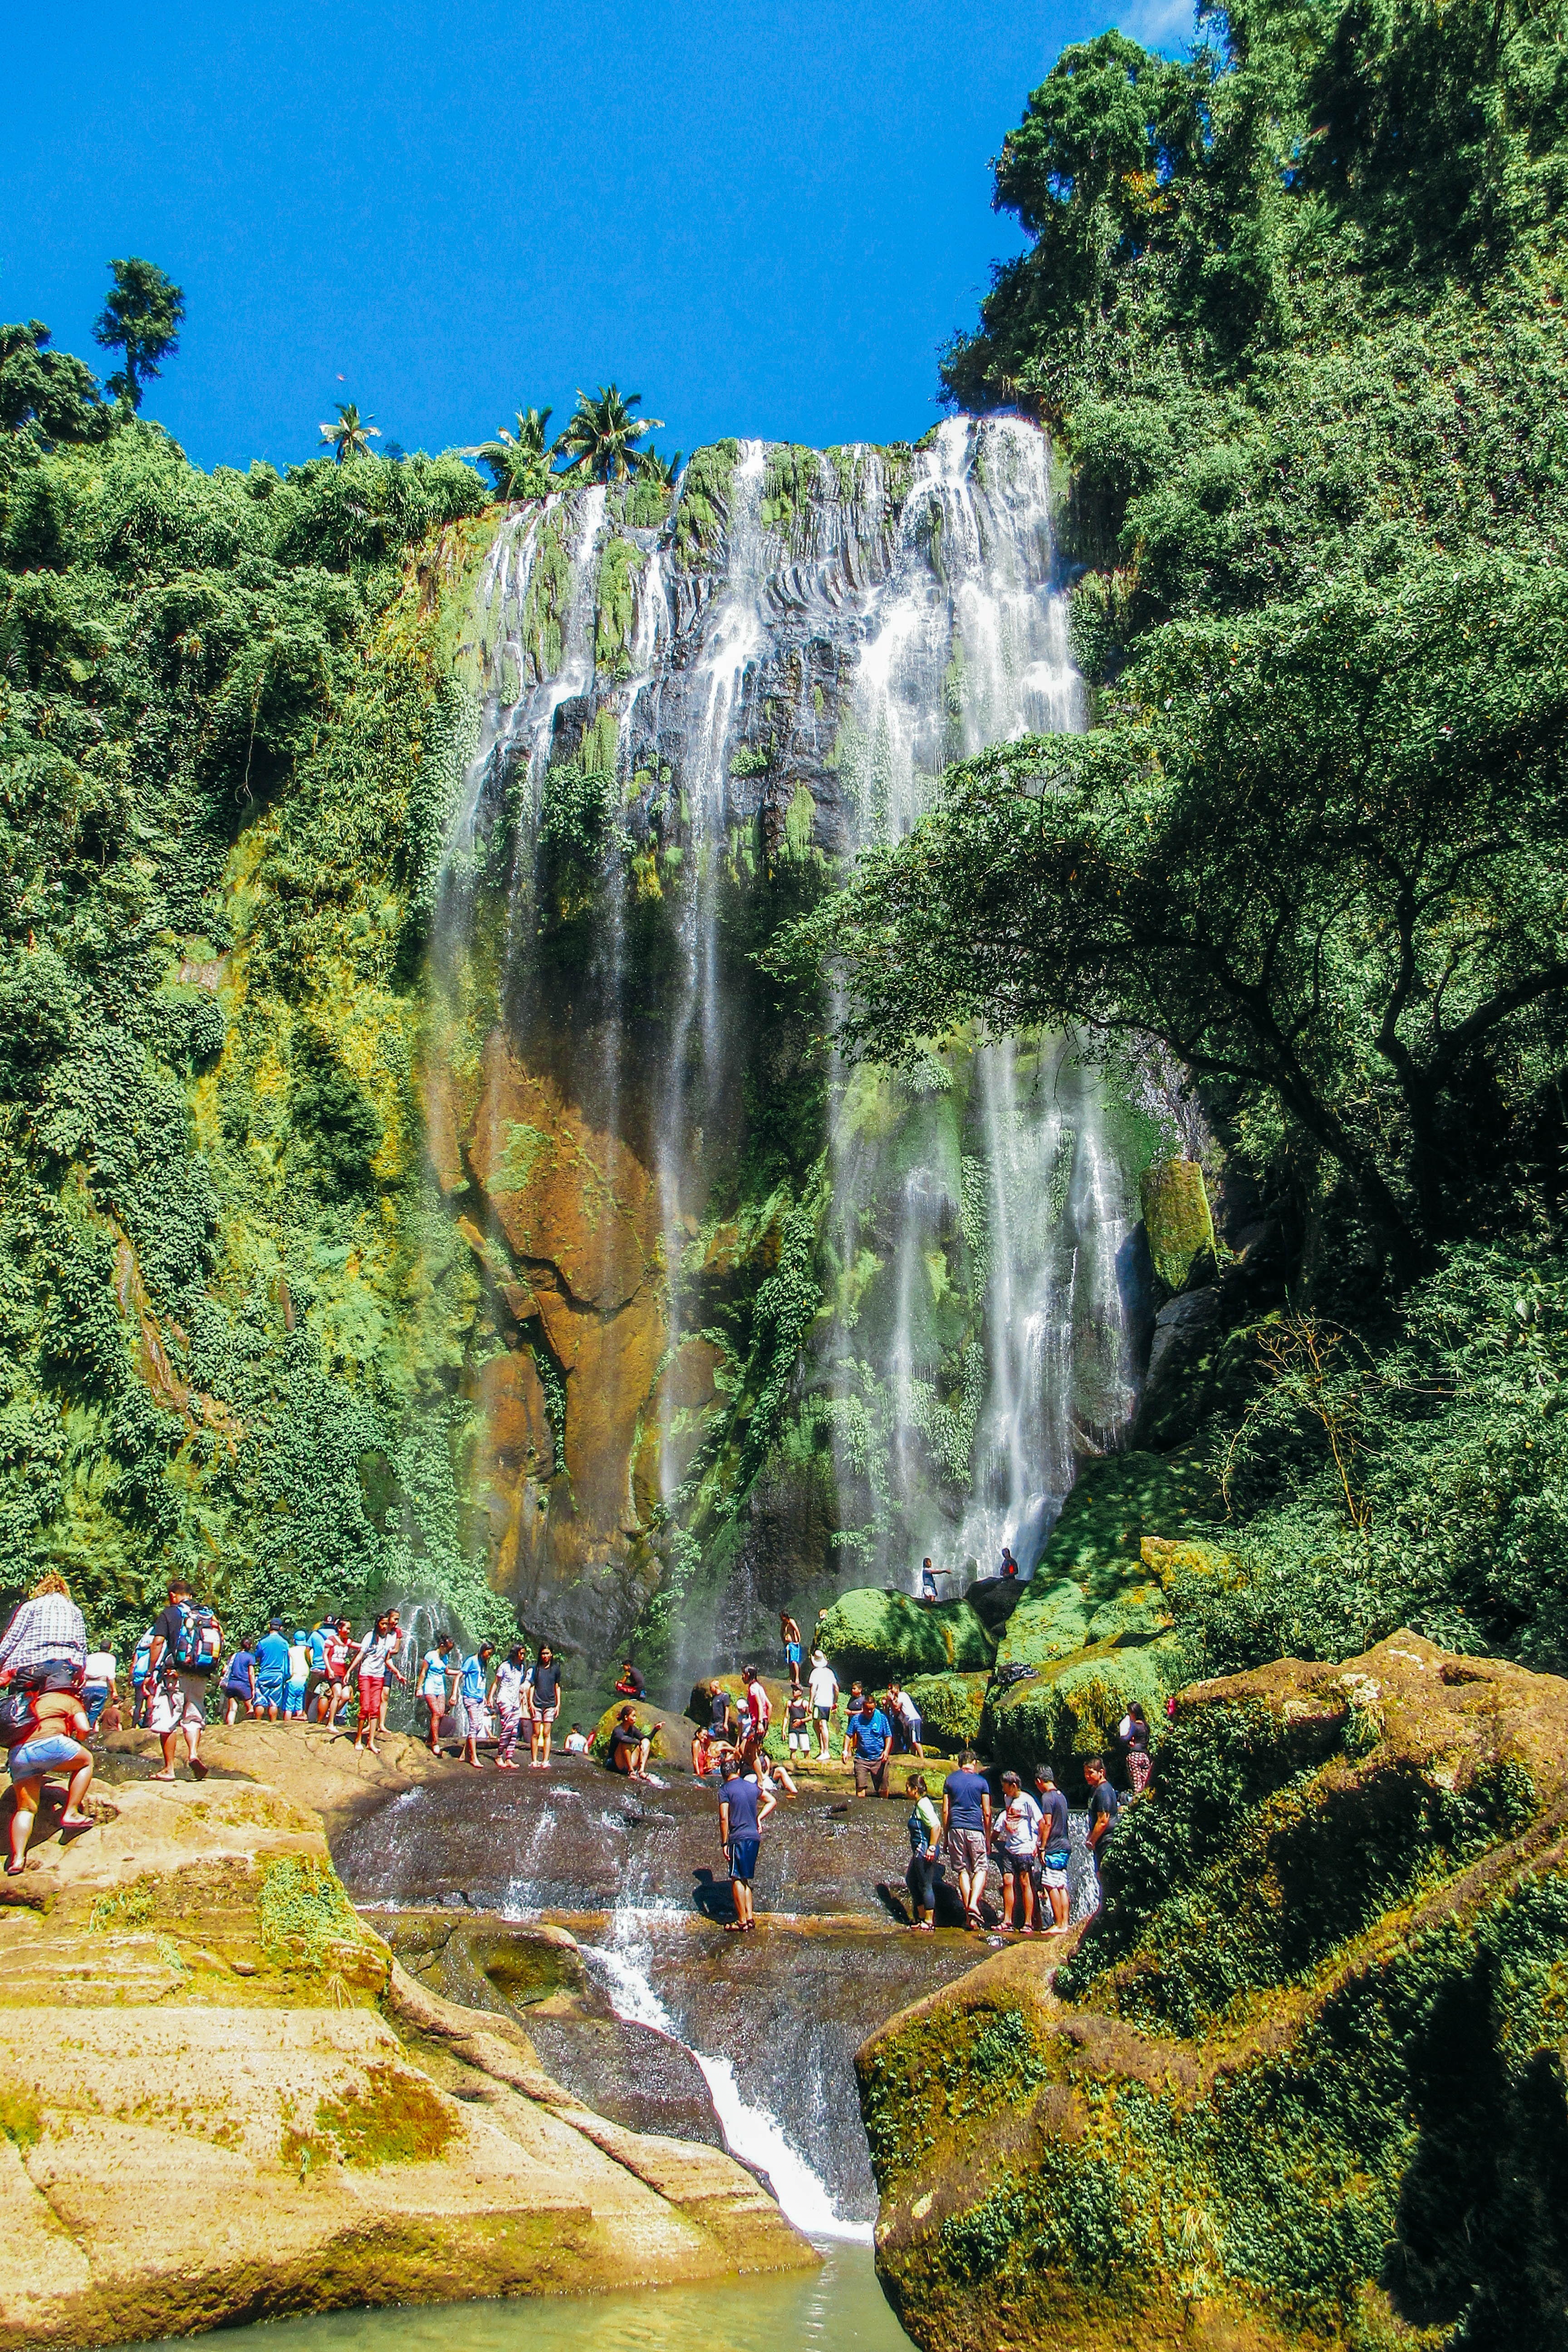 MAJESTIC. Despite the crowds, Hulugan Falls will elicit awe from visitors. Photo by Joshua Berida  